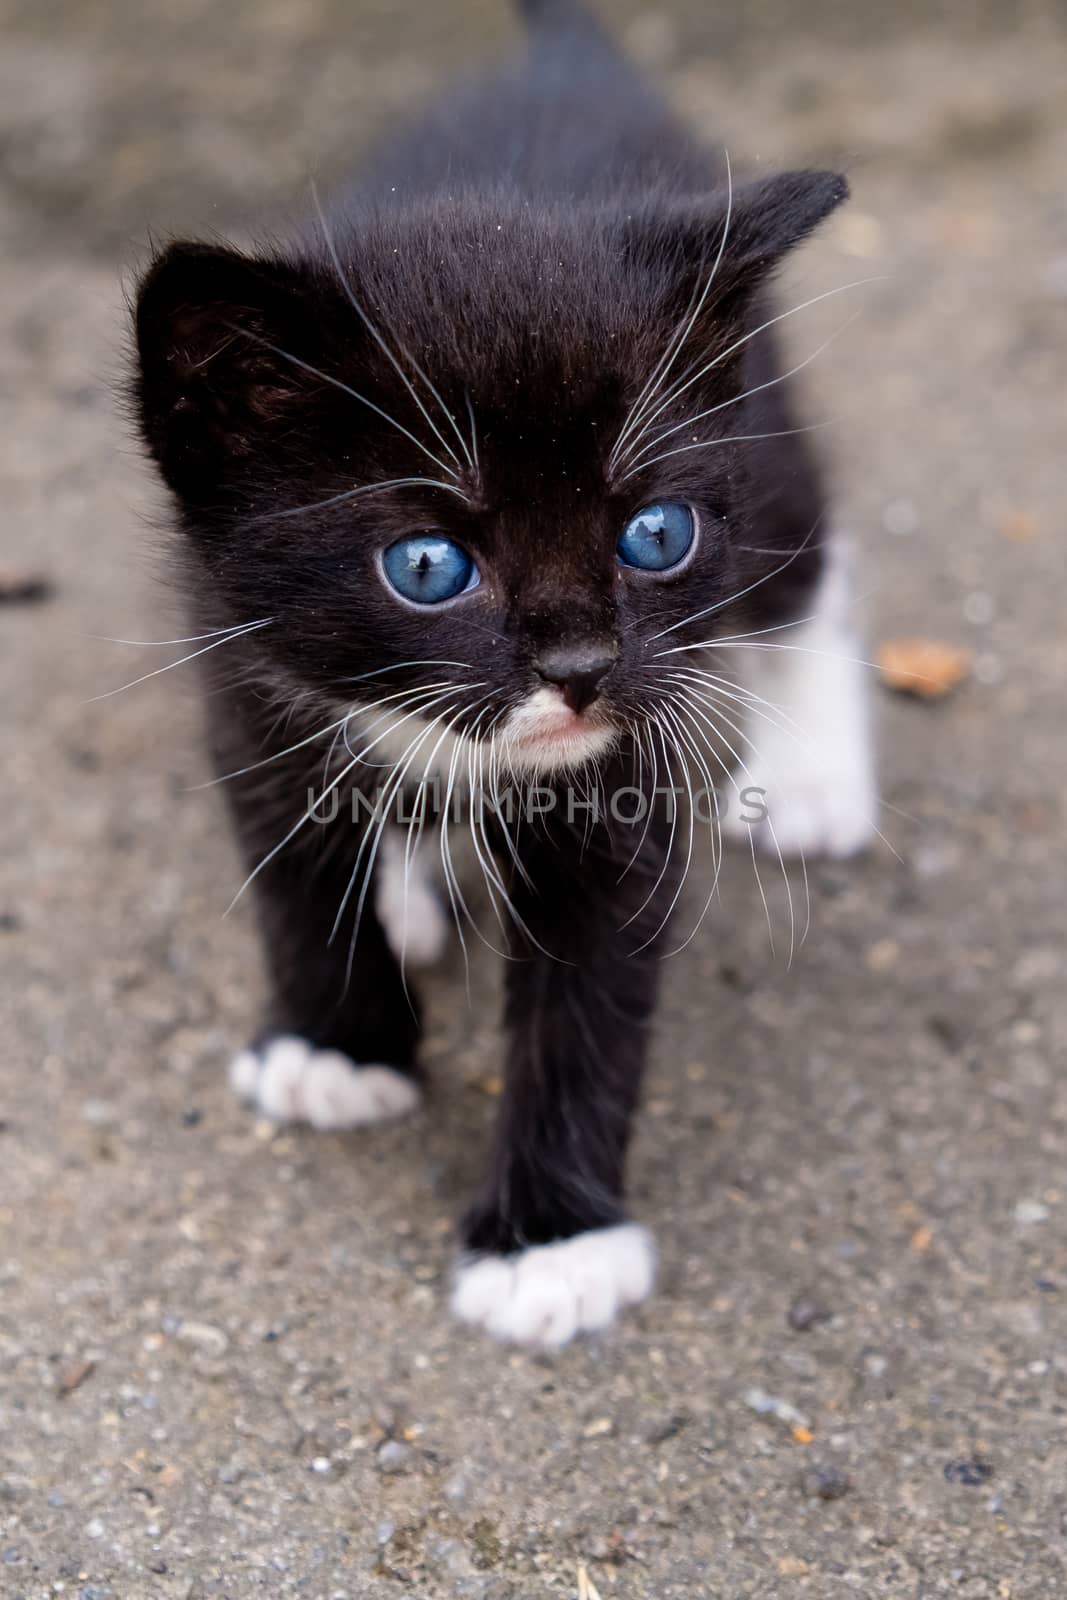 Small black kitten with blue eyes in outdoors.